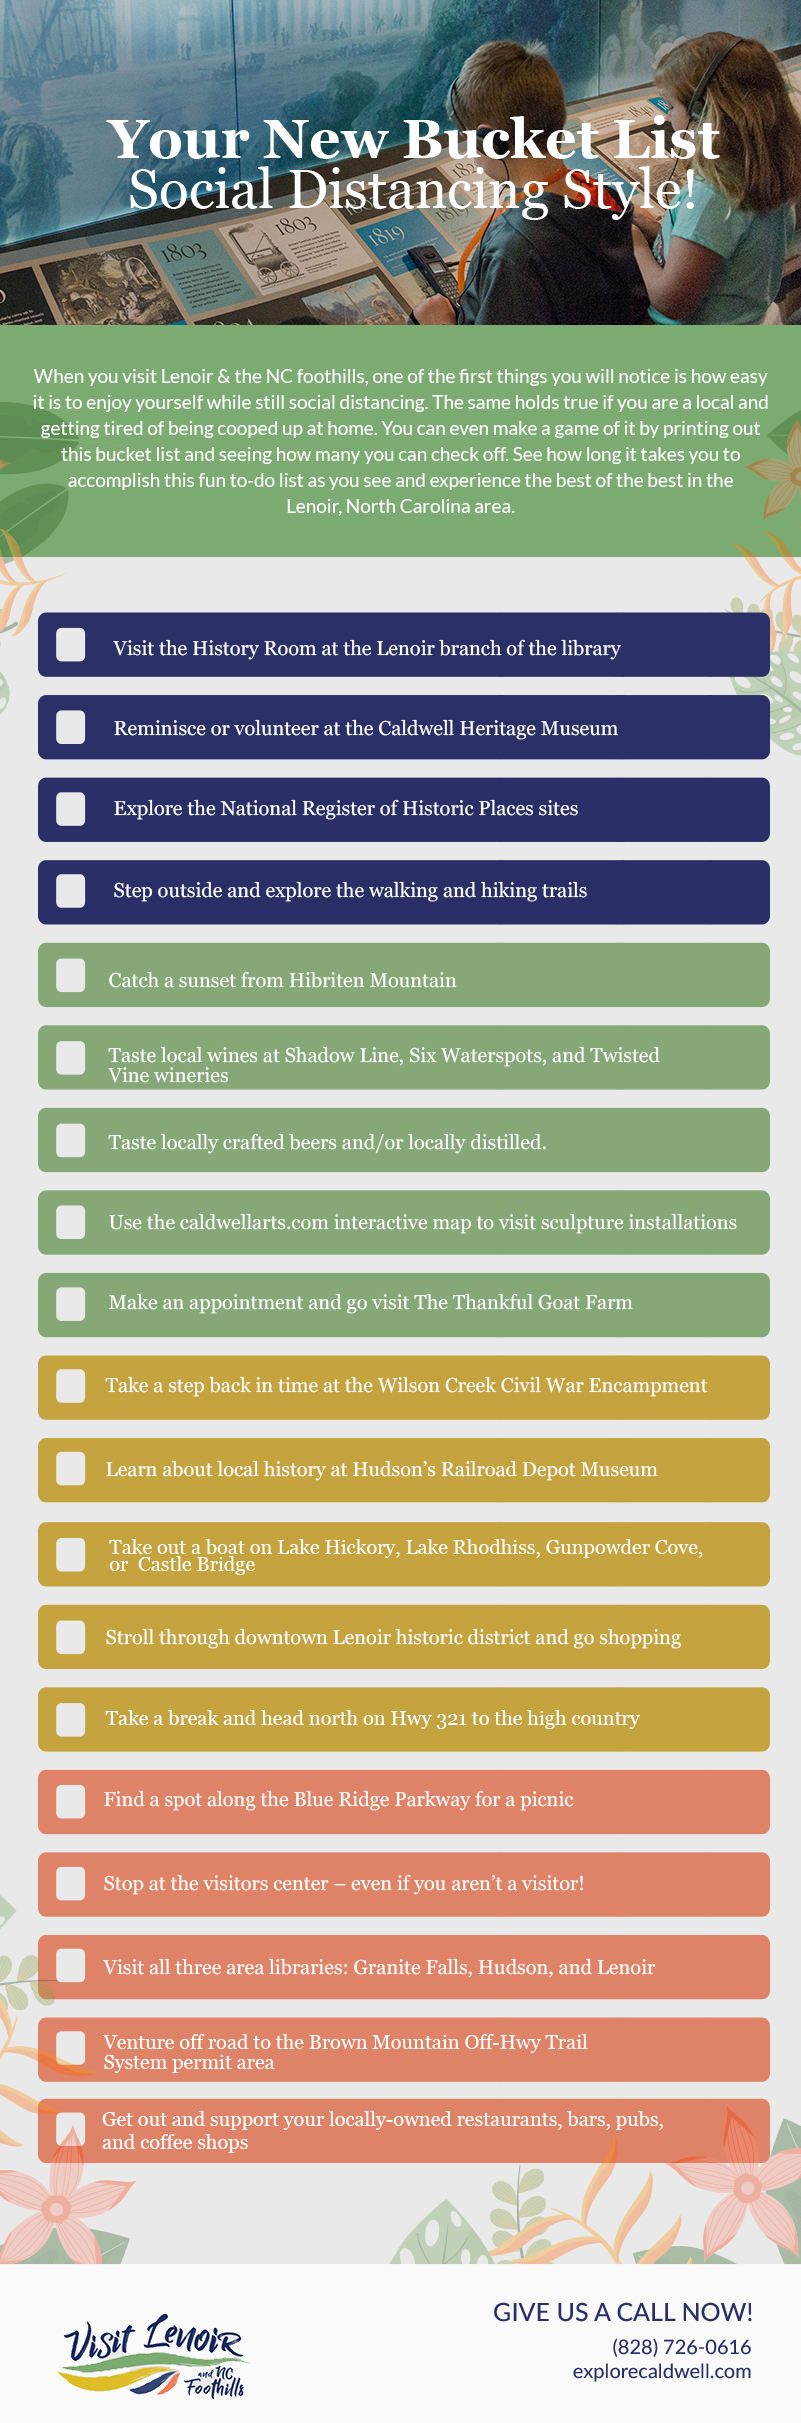 Your New Bucket List – Social Distancing Style! [infographic]